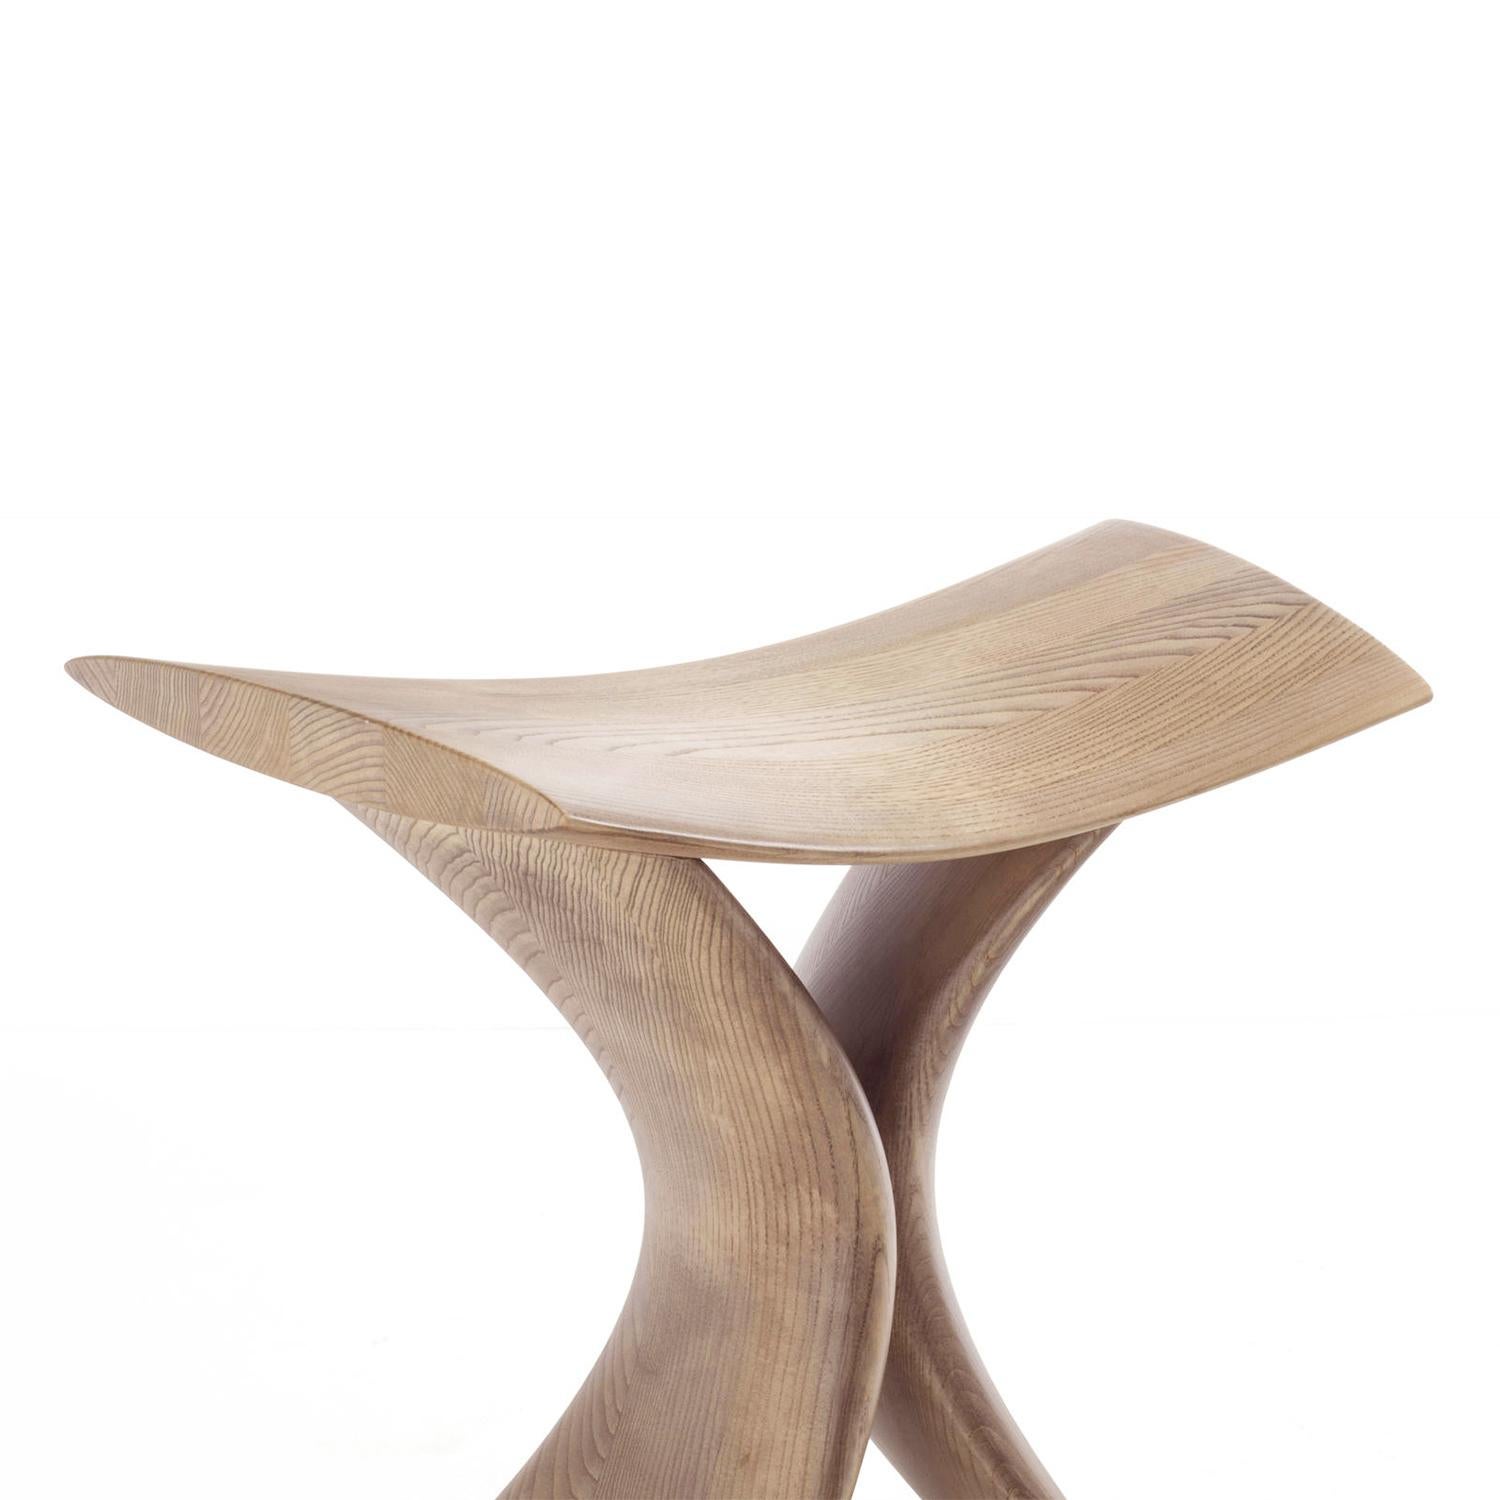 Stool Aman Natura in solid ash wood 
in natural ash finish. Also available in 
stained cafe finish.